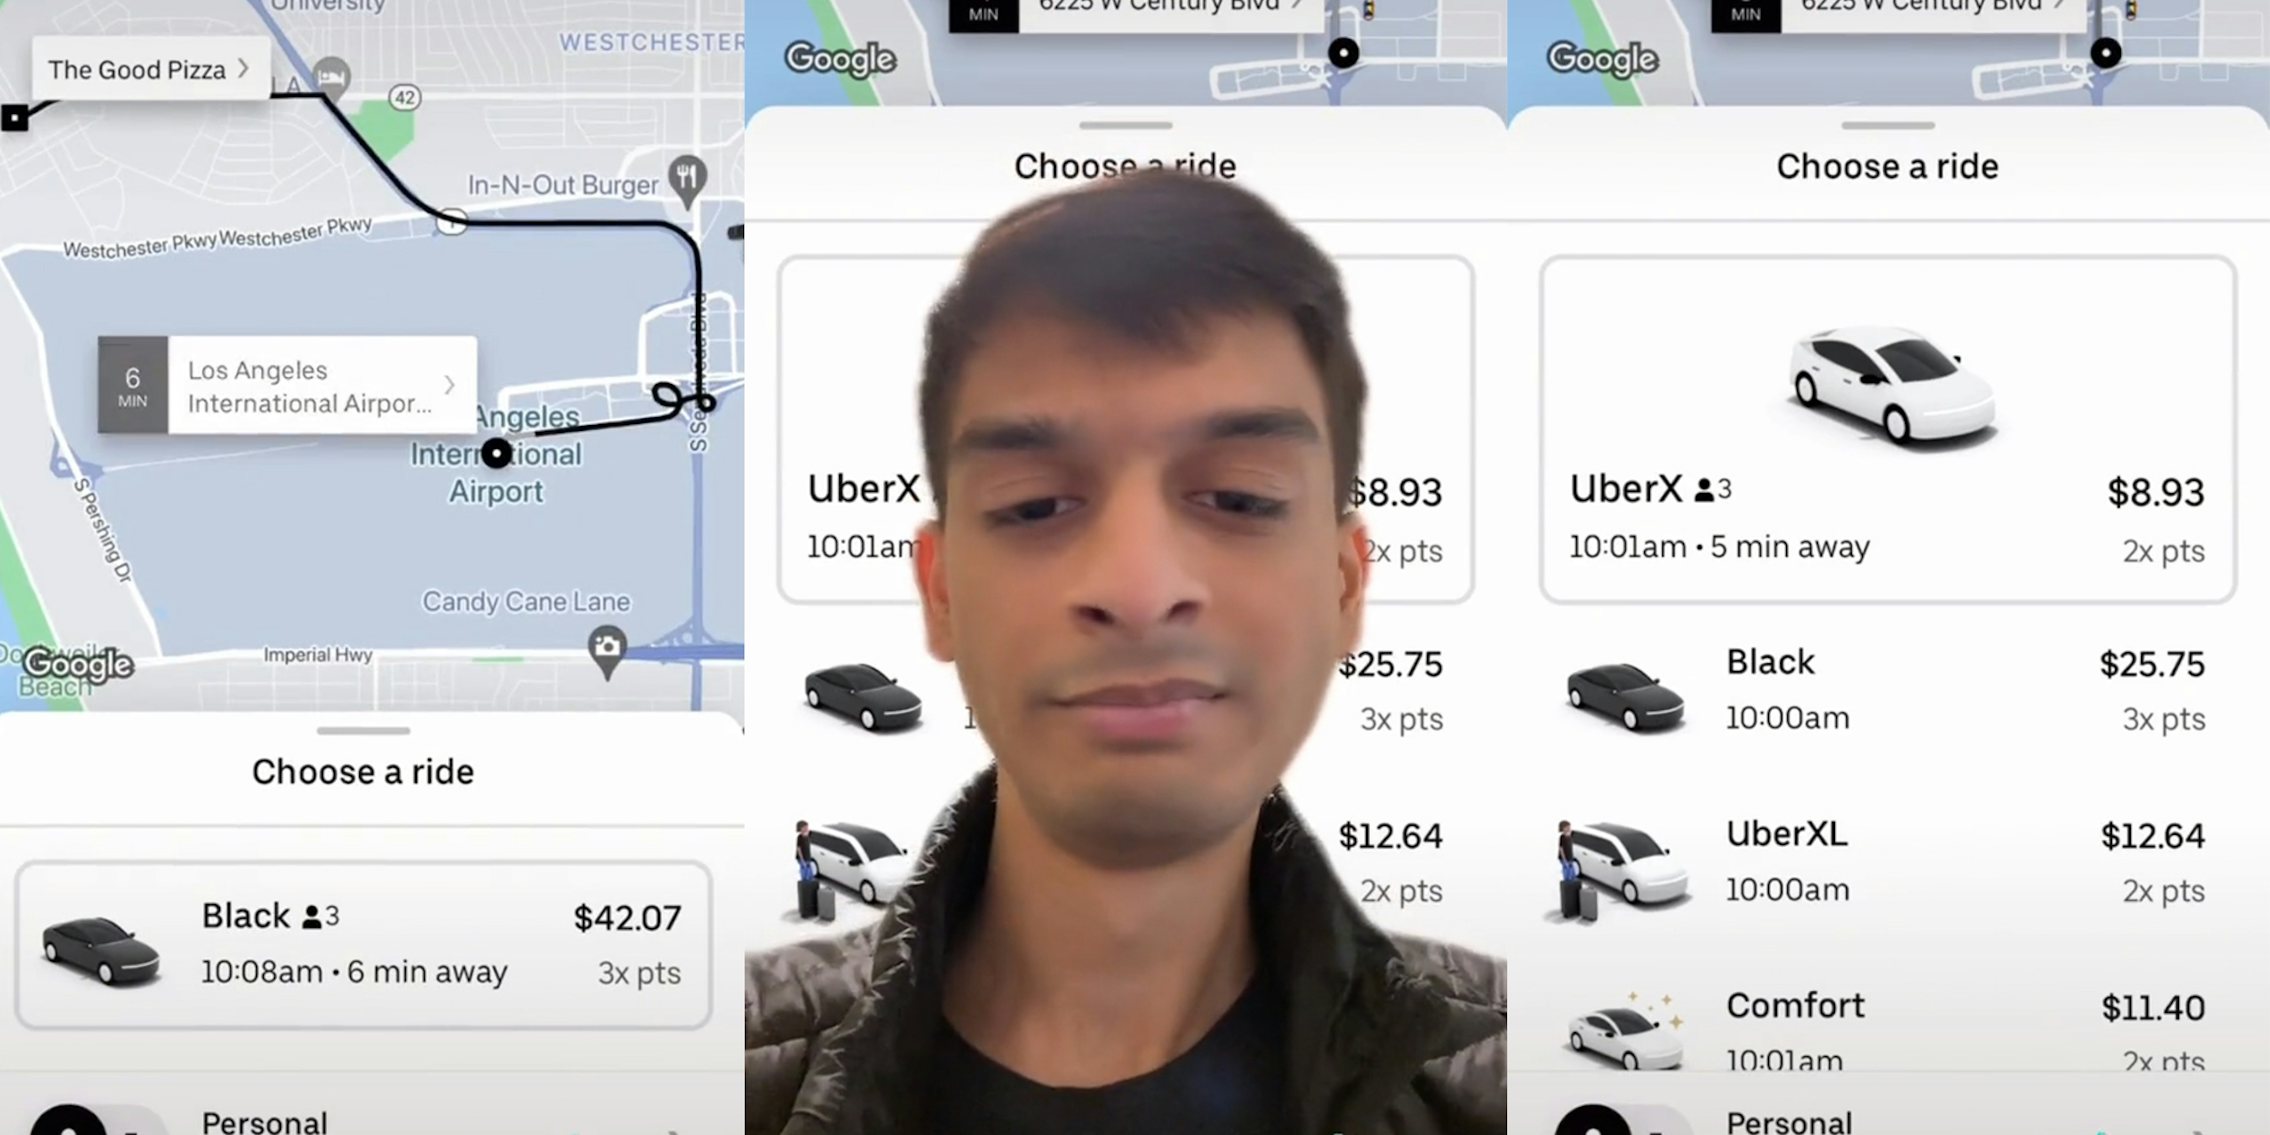 Uber screen with $42.07 option (l) man in front of Uber selection screen (c) Uber screen with $8.93 option (r)